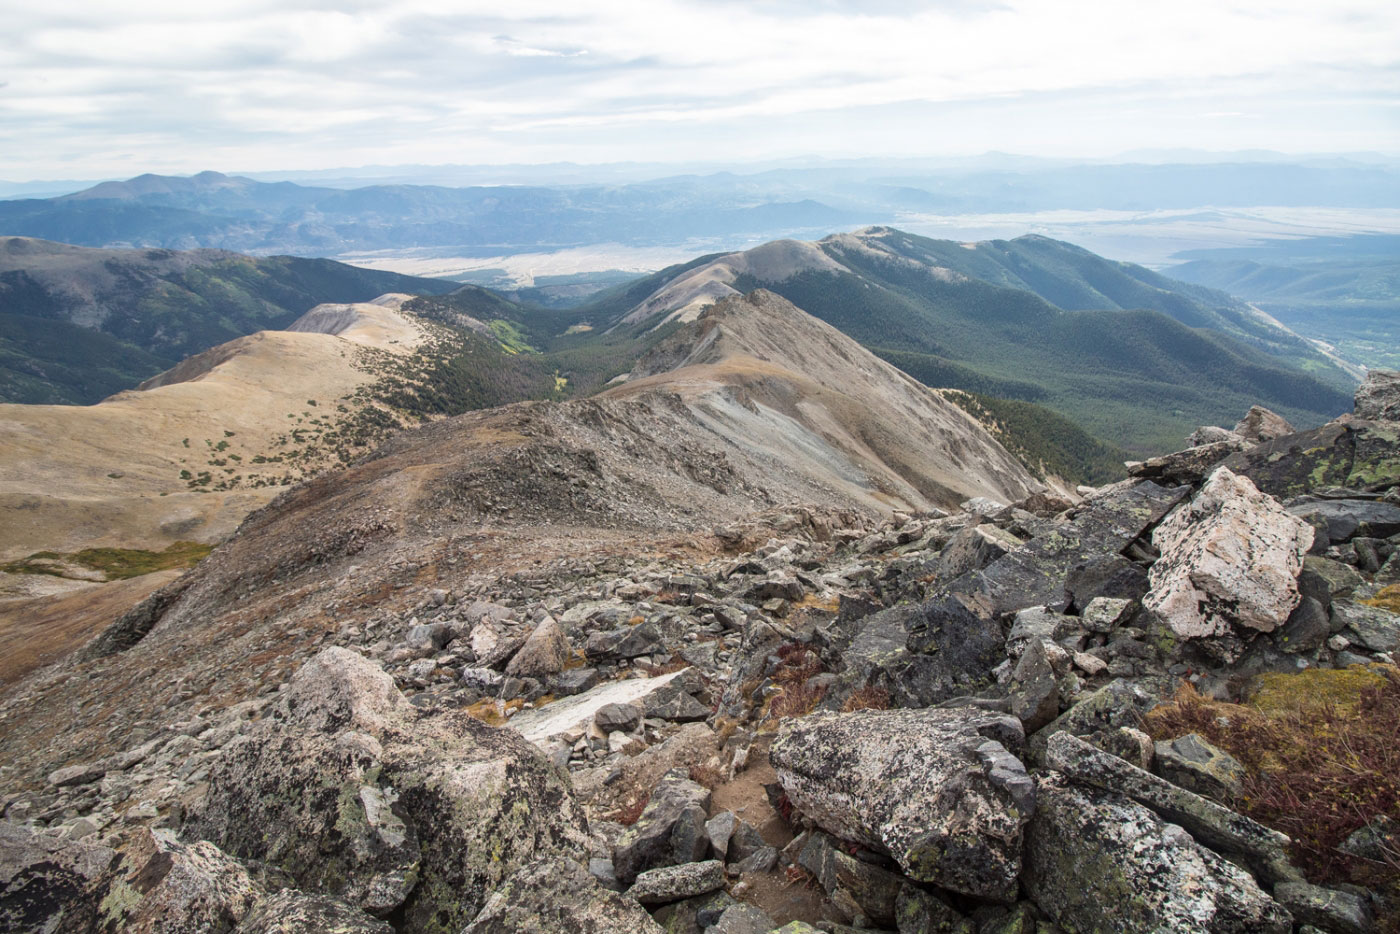 Hike Mount Yale via Colorado Trail in San Isabel National Forest, Colorado - Stav is Lost